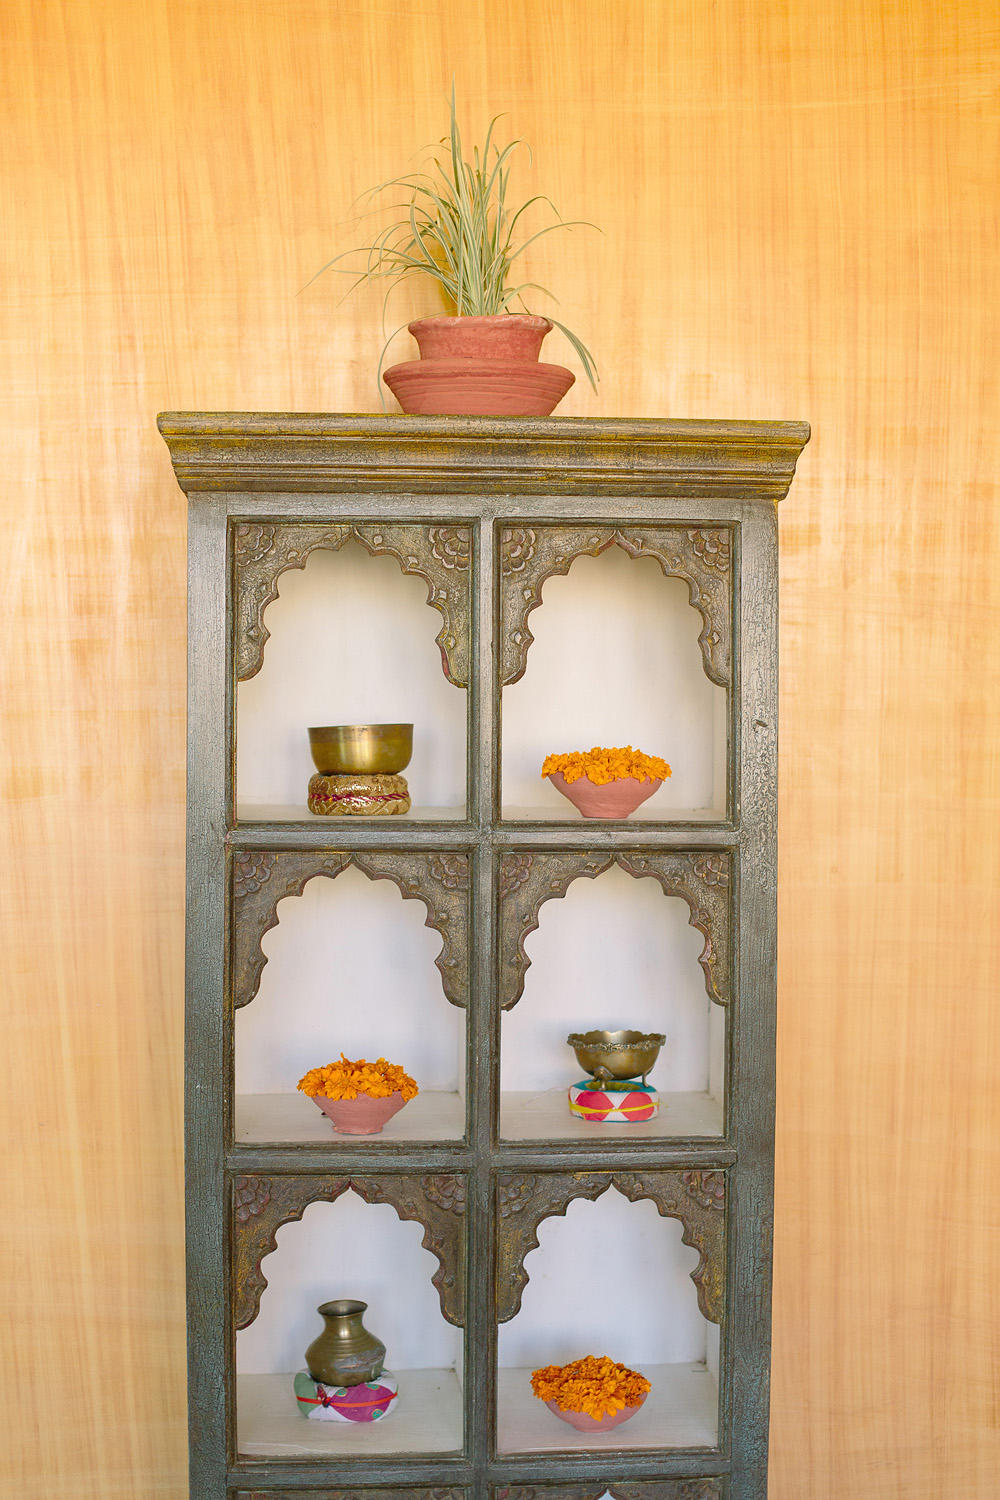 Art Case at Suryagarh Palace in India